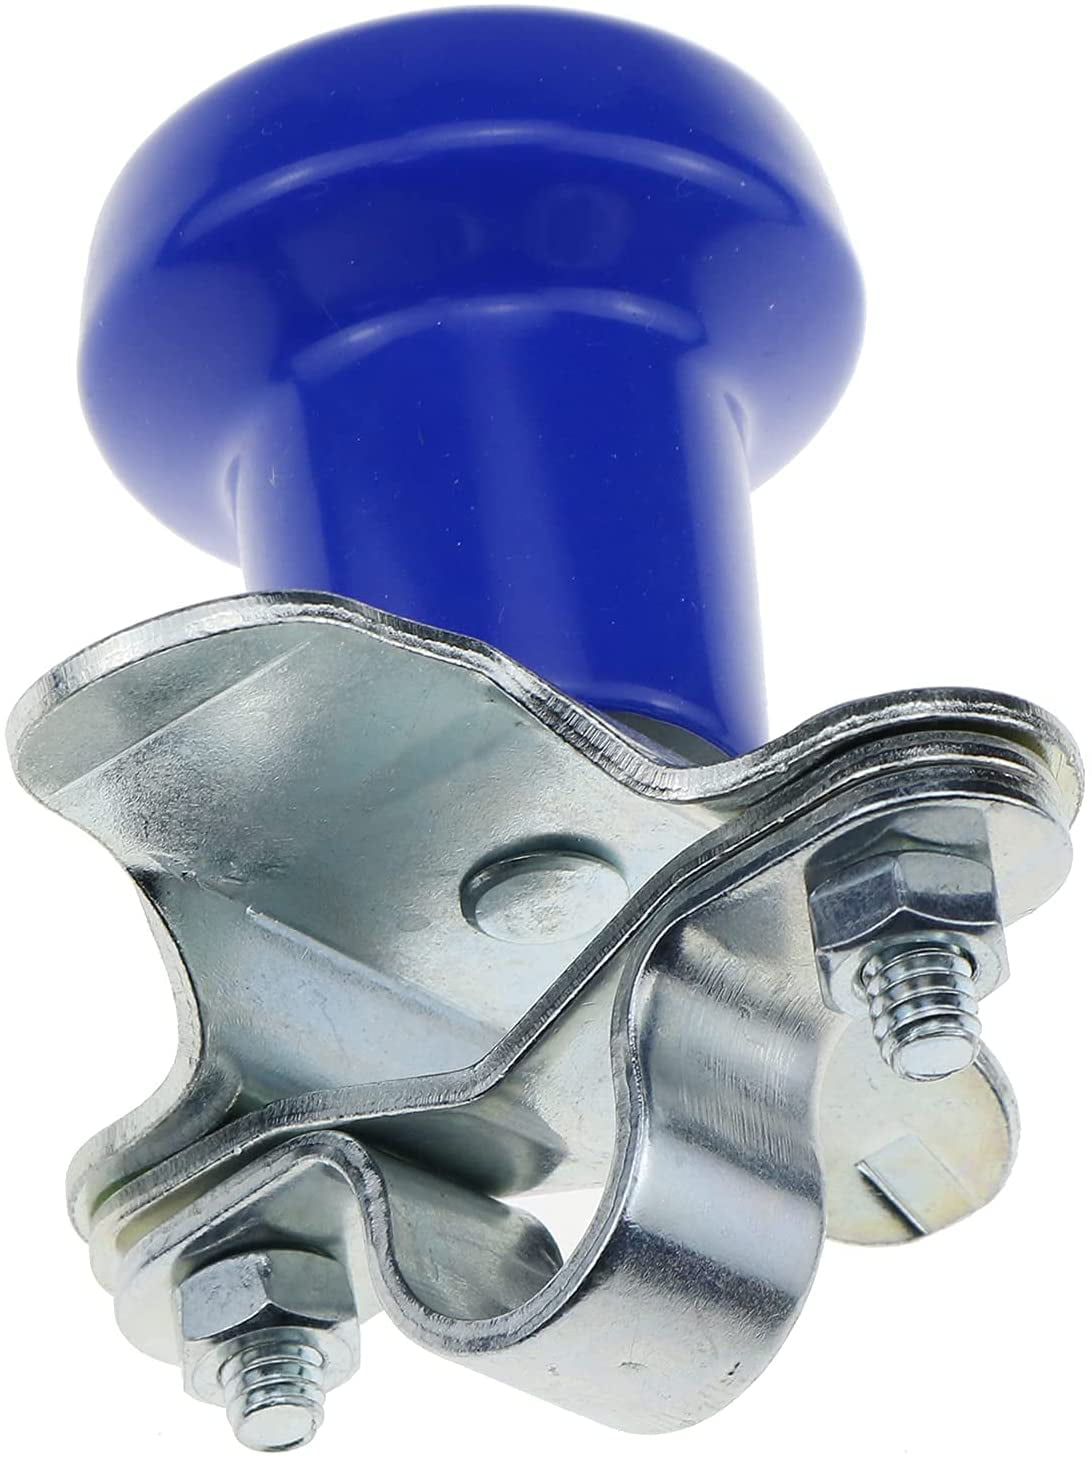 WSV120B Steering Wheel Spinner Knob Blue Fits Ford Fits New Holland Farmtrac Tra 